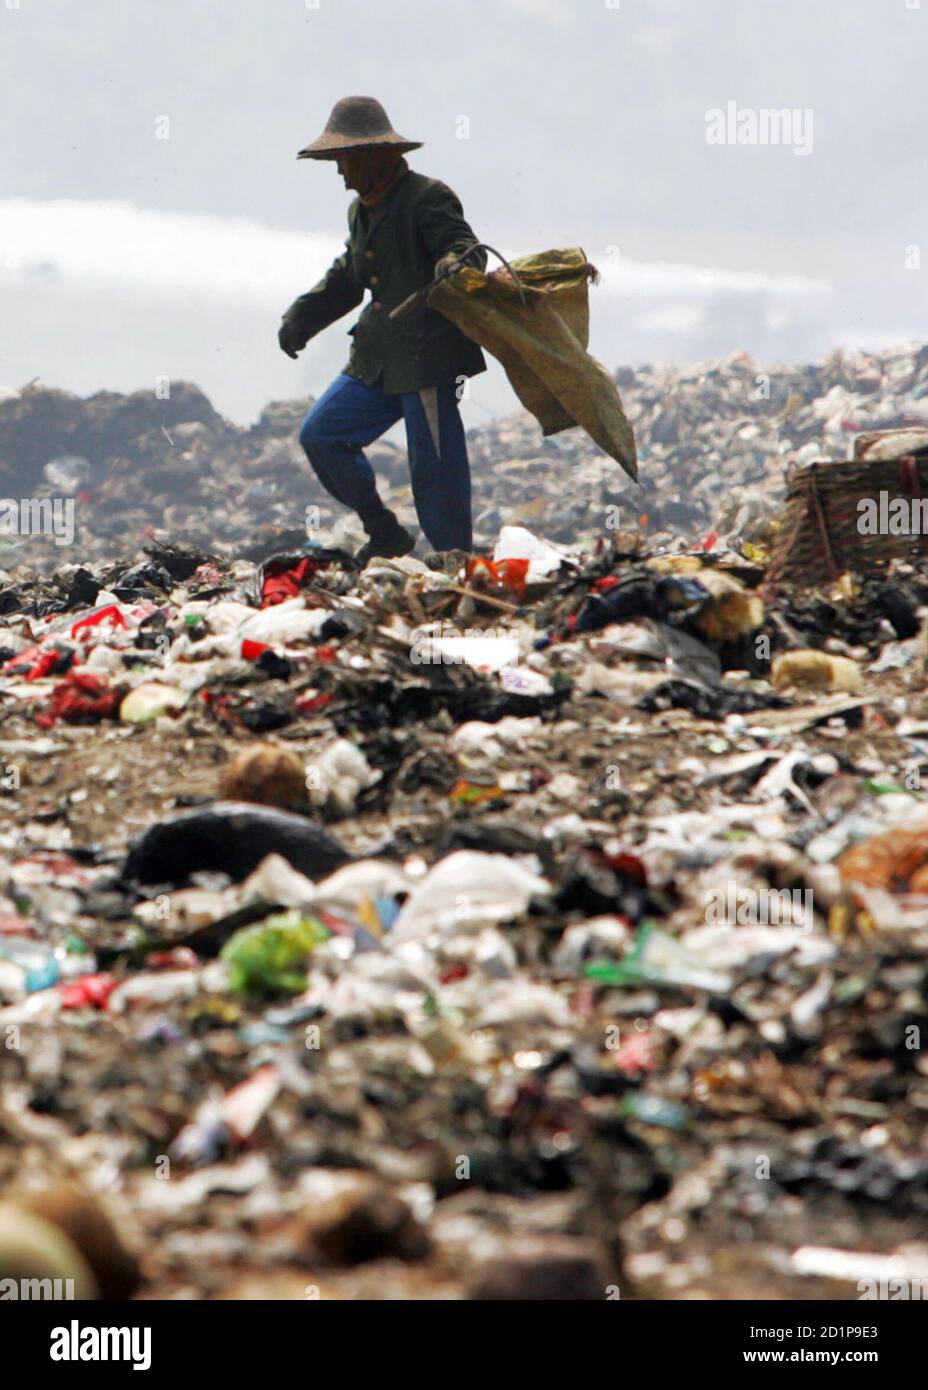 A garbage collector looks for waste to recycle at a garbage dump site in  Sanya, China's Hainan province, October 17, 2006. Growing populations and  booming economies are threatening fragile coastal areas in